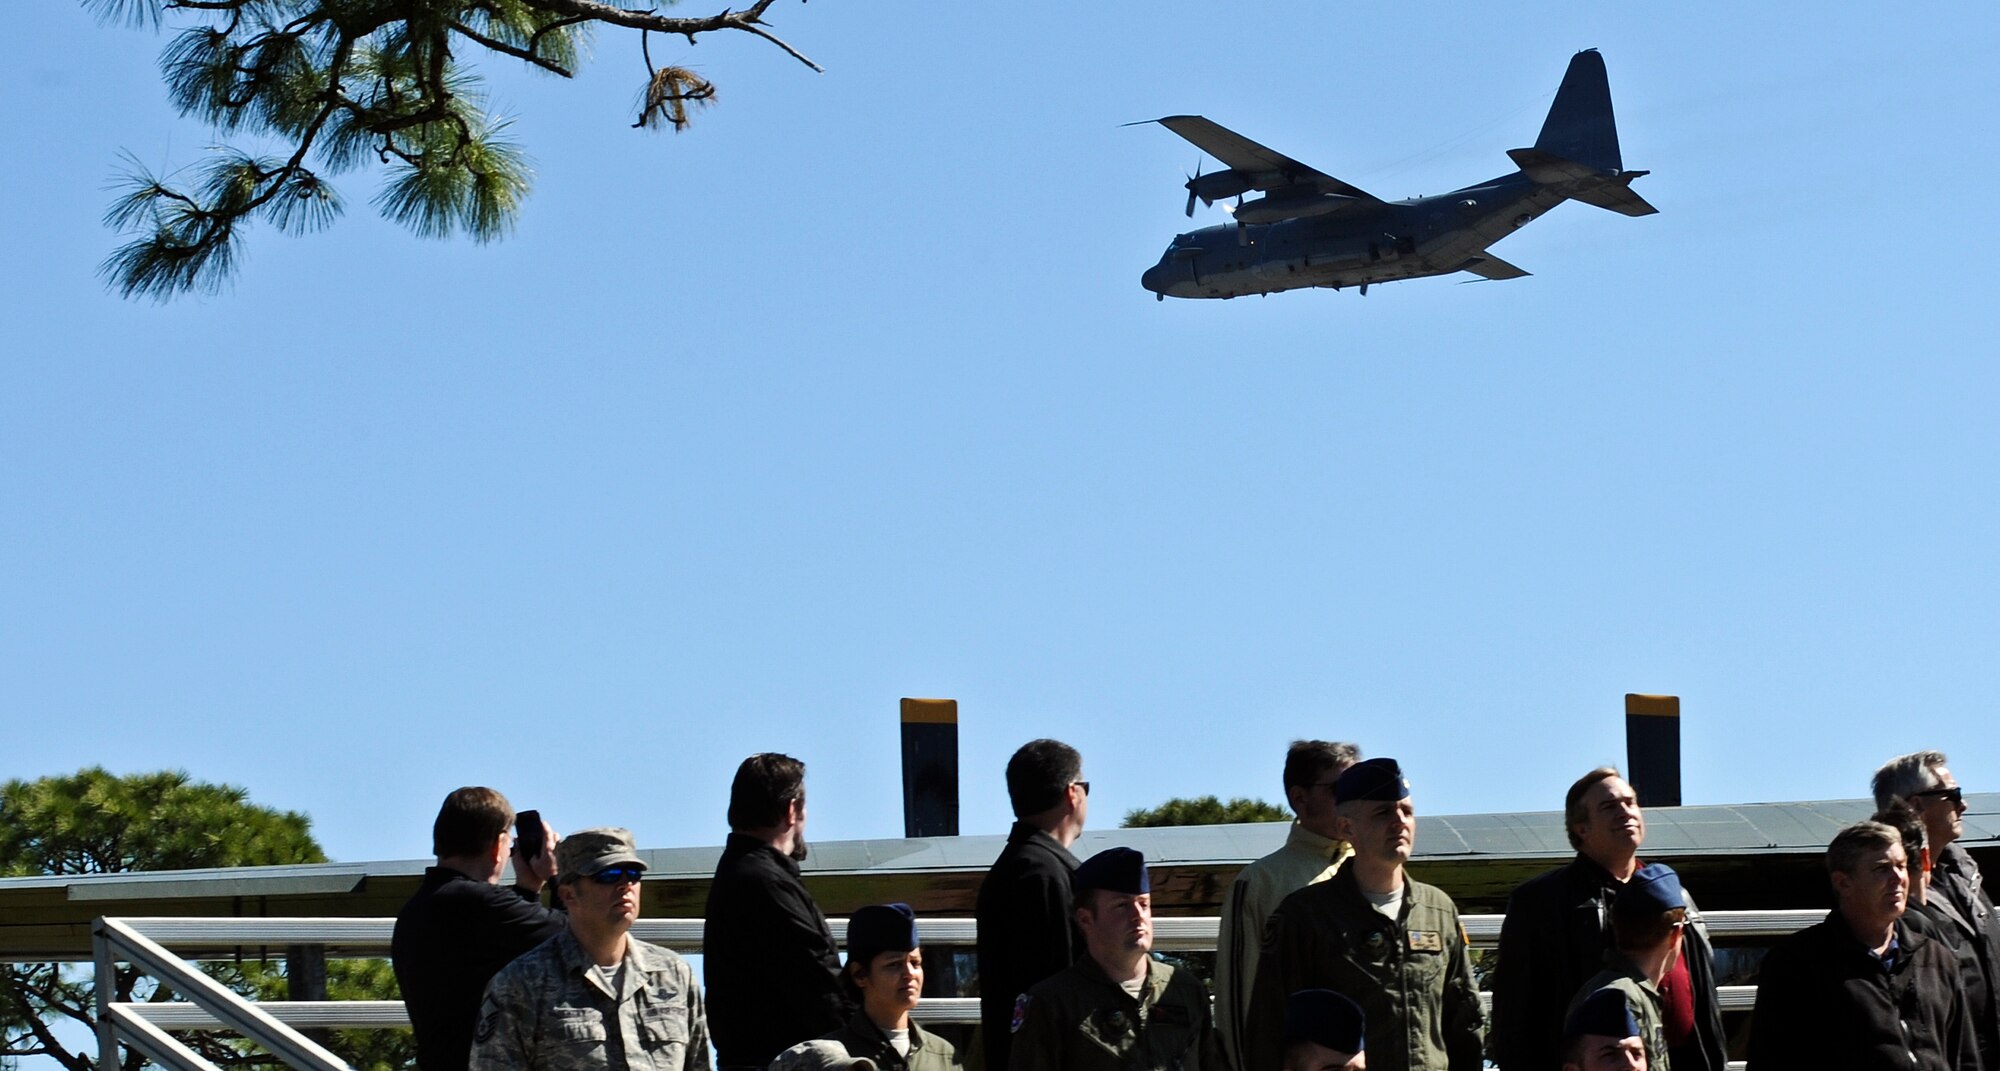 An AC-130H Spectre gunship flys over the Jockey-14 memorial ceremony at the air park on Hurlburt Field, Fla., March 14, 2014. Today marked the 20th anniversary of when the aircraft experienced an in-flight explosion, which killed eight of the 14 aircrew members who were supporting Operation Continue Hope II in Somalia. (U.S. Air Force photo/Senior Airman Michelle Patten)

